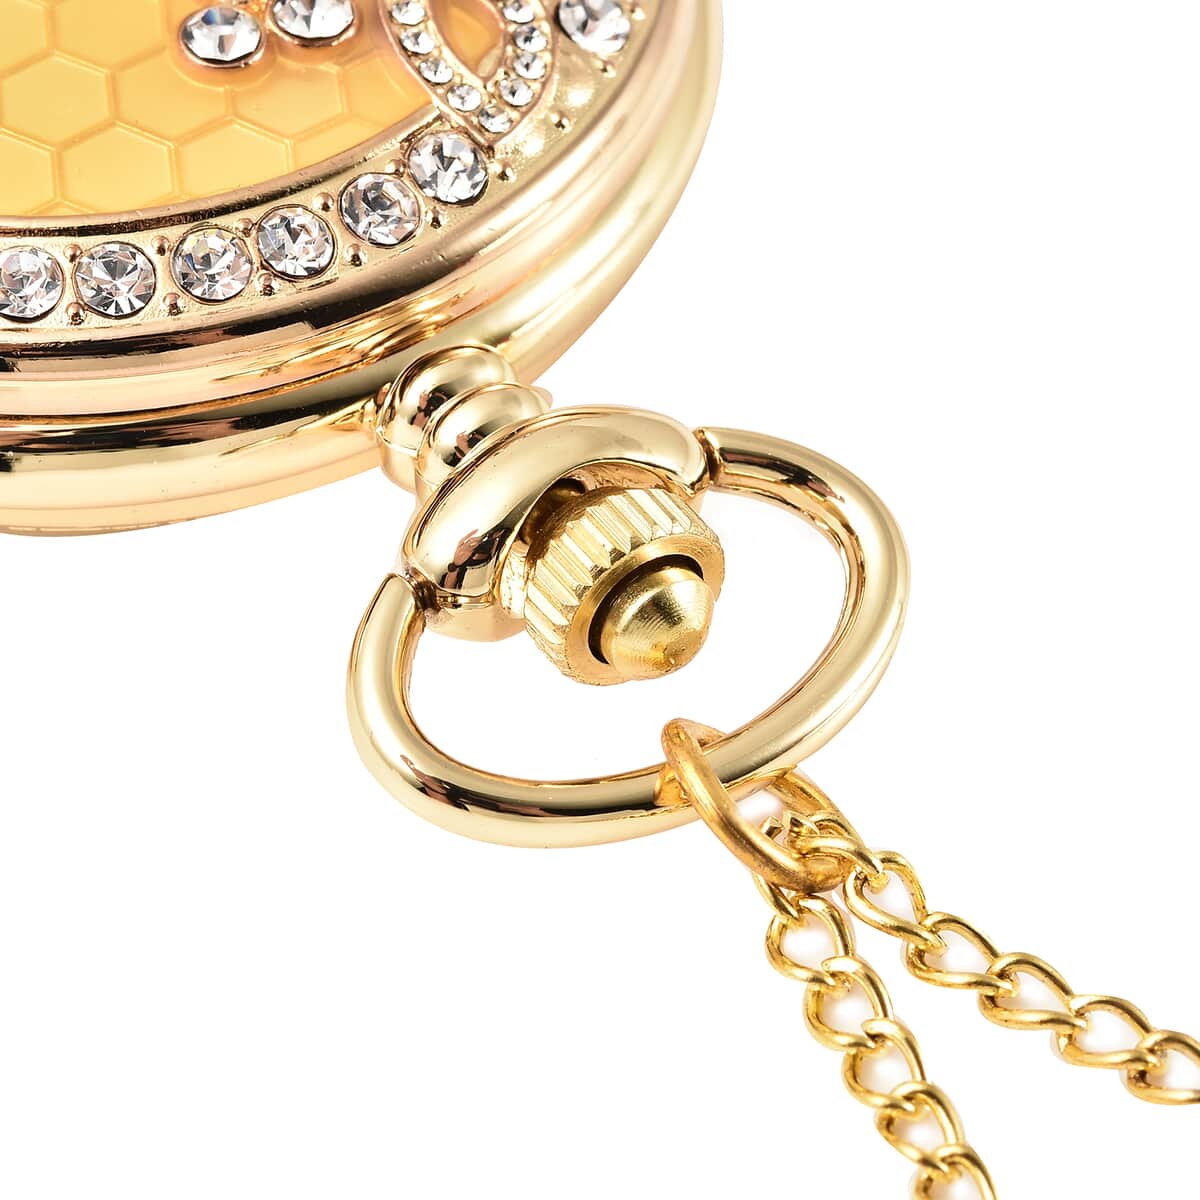 STRADA White Crystal Japanese Movement Carving Bee Pattern Pocket Watch with Chain in Goldtone (31 Inches) image number 5